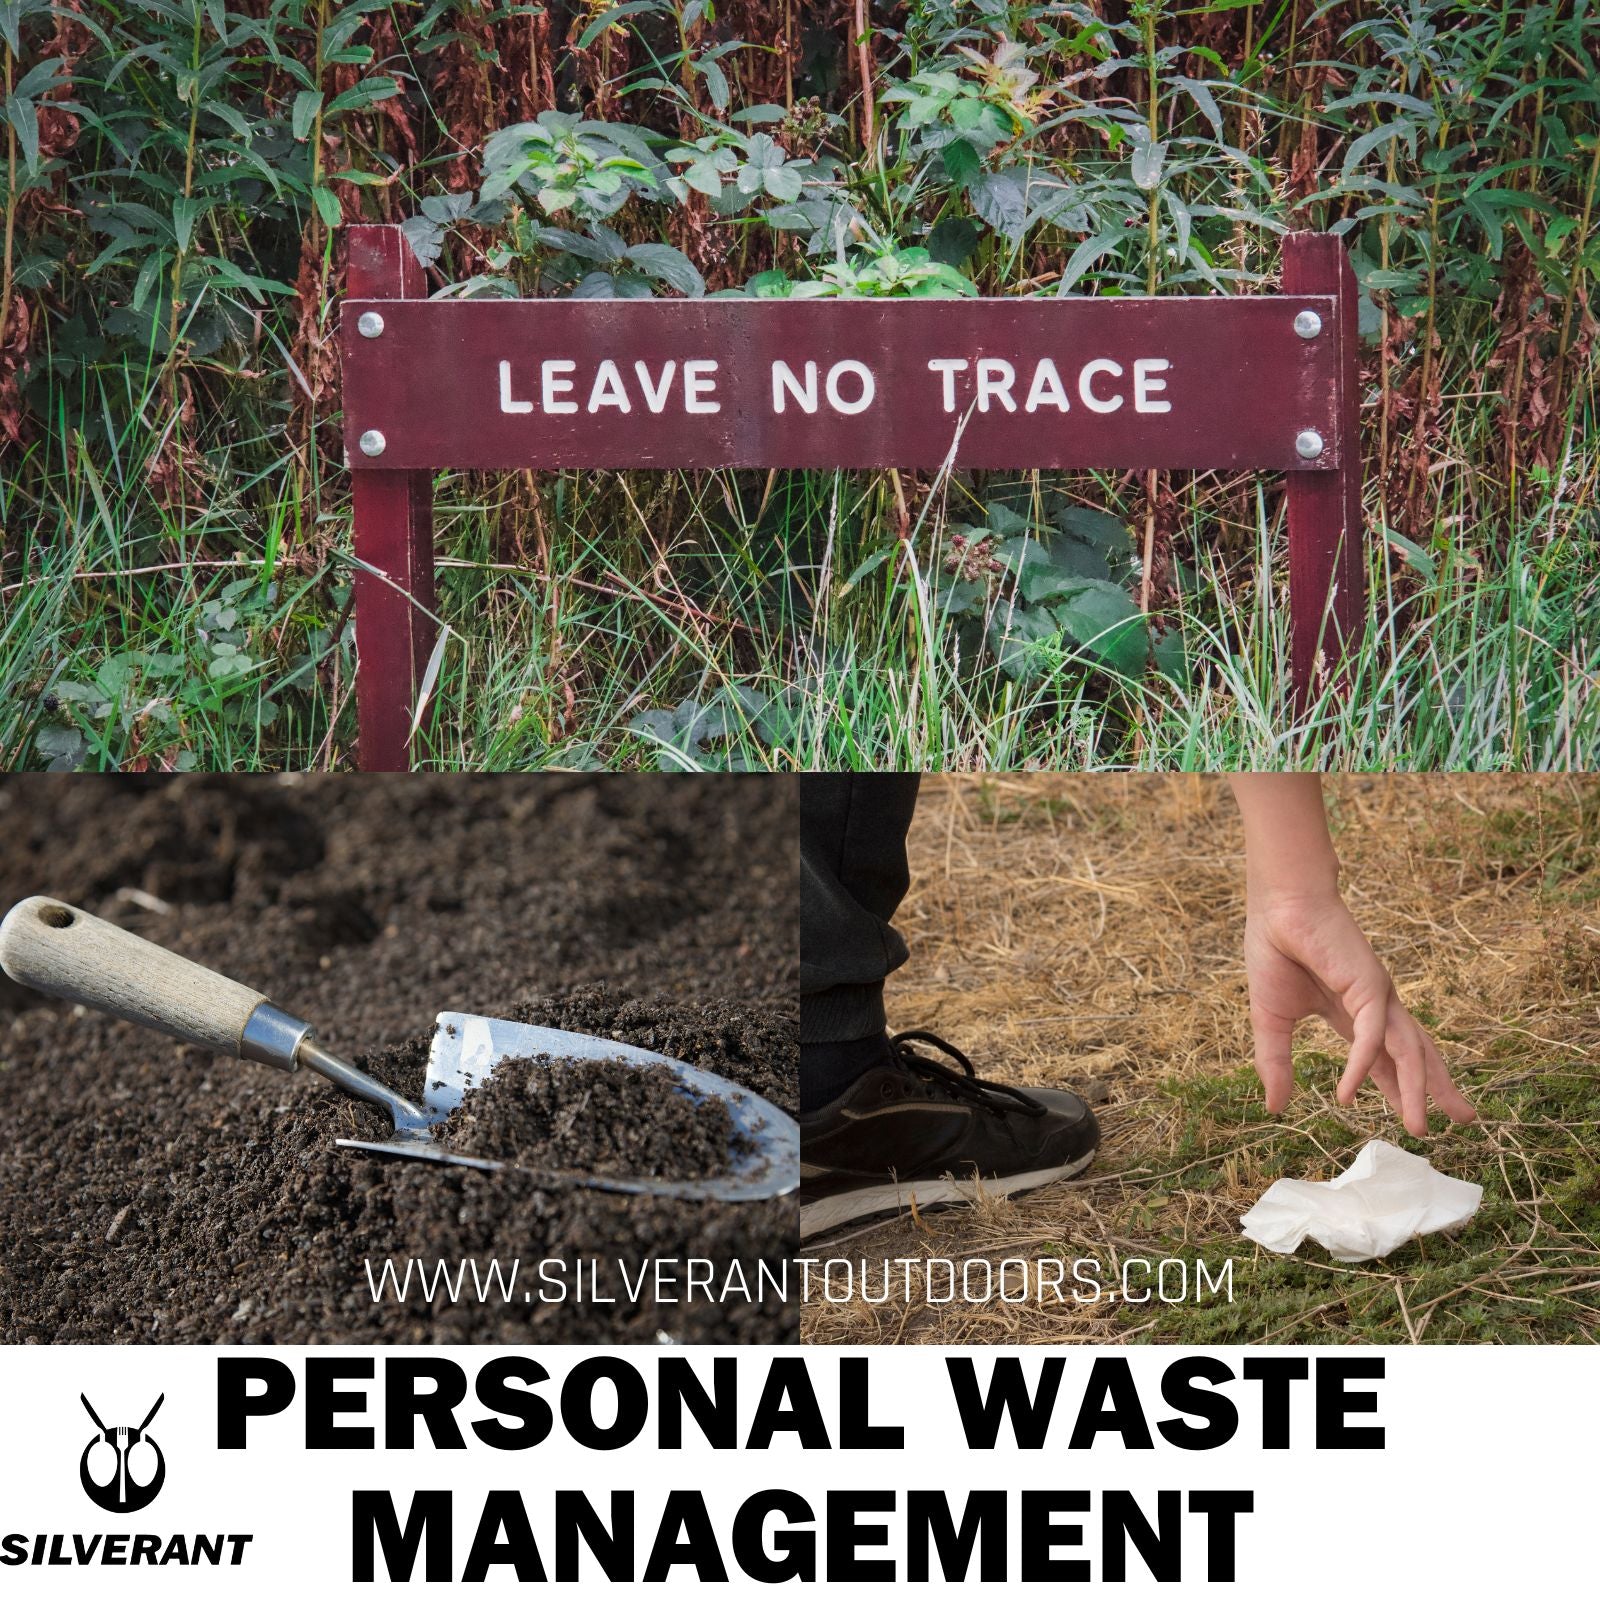 Personal Waste Management - SilverAnt Outdoors